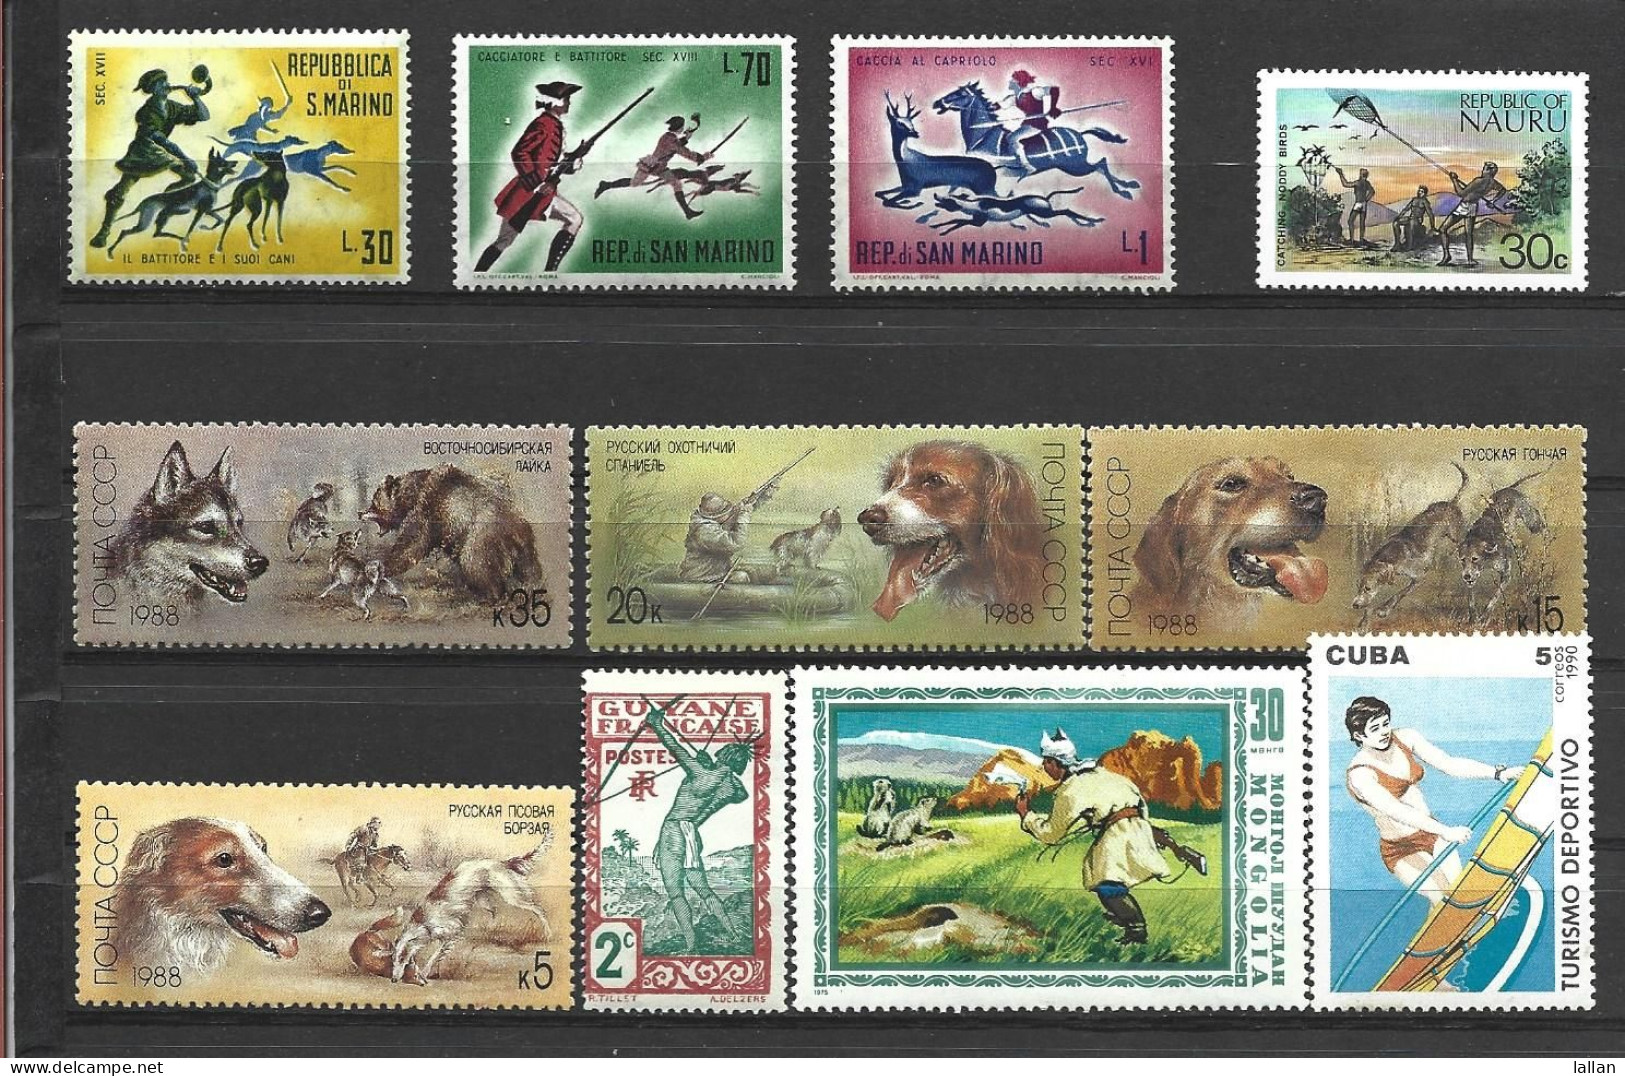 Collection Of 31 Stamps, Hunting, Fishing, And Boating, MNH, Some Disturbed Gum, Condition As Per Front/back Scan - Tiro (armas)